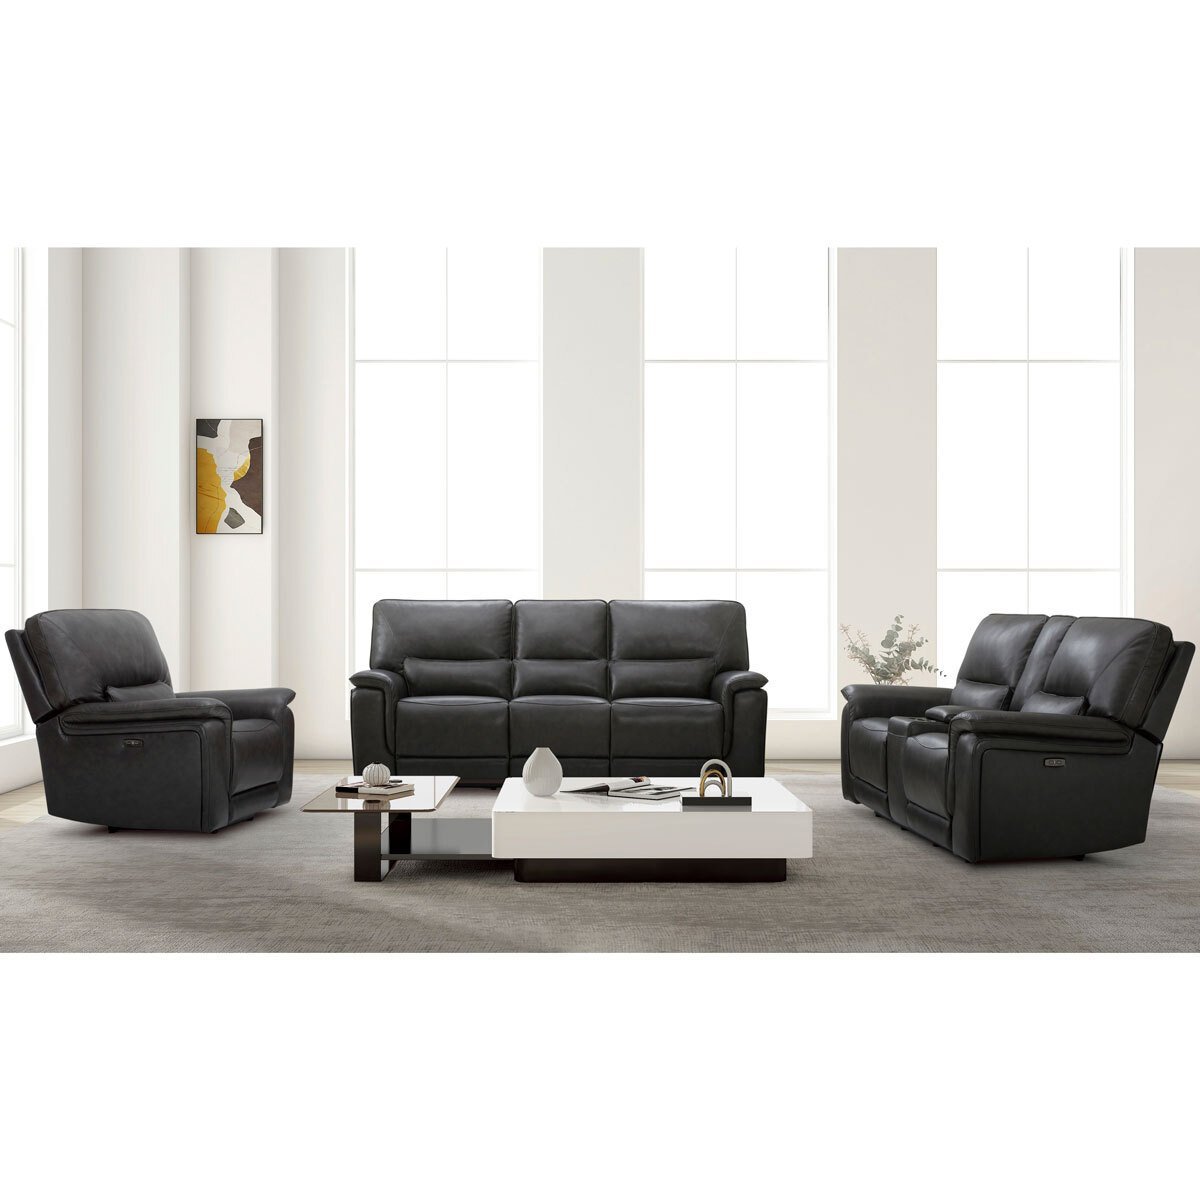 Gilman Creek Maxwell Grey Leather Power Recliner 2 Seater Sofa With Power Headrests - Signature Retail Stores